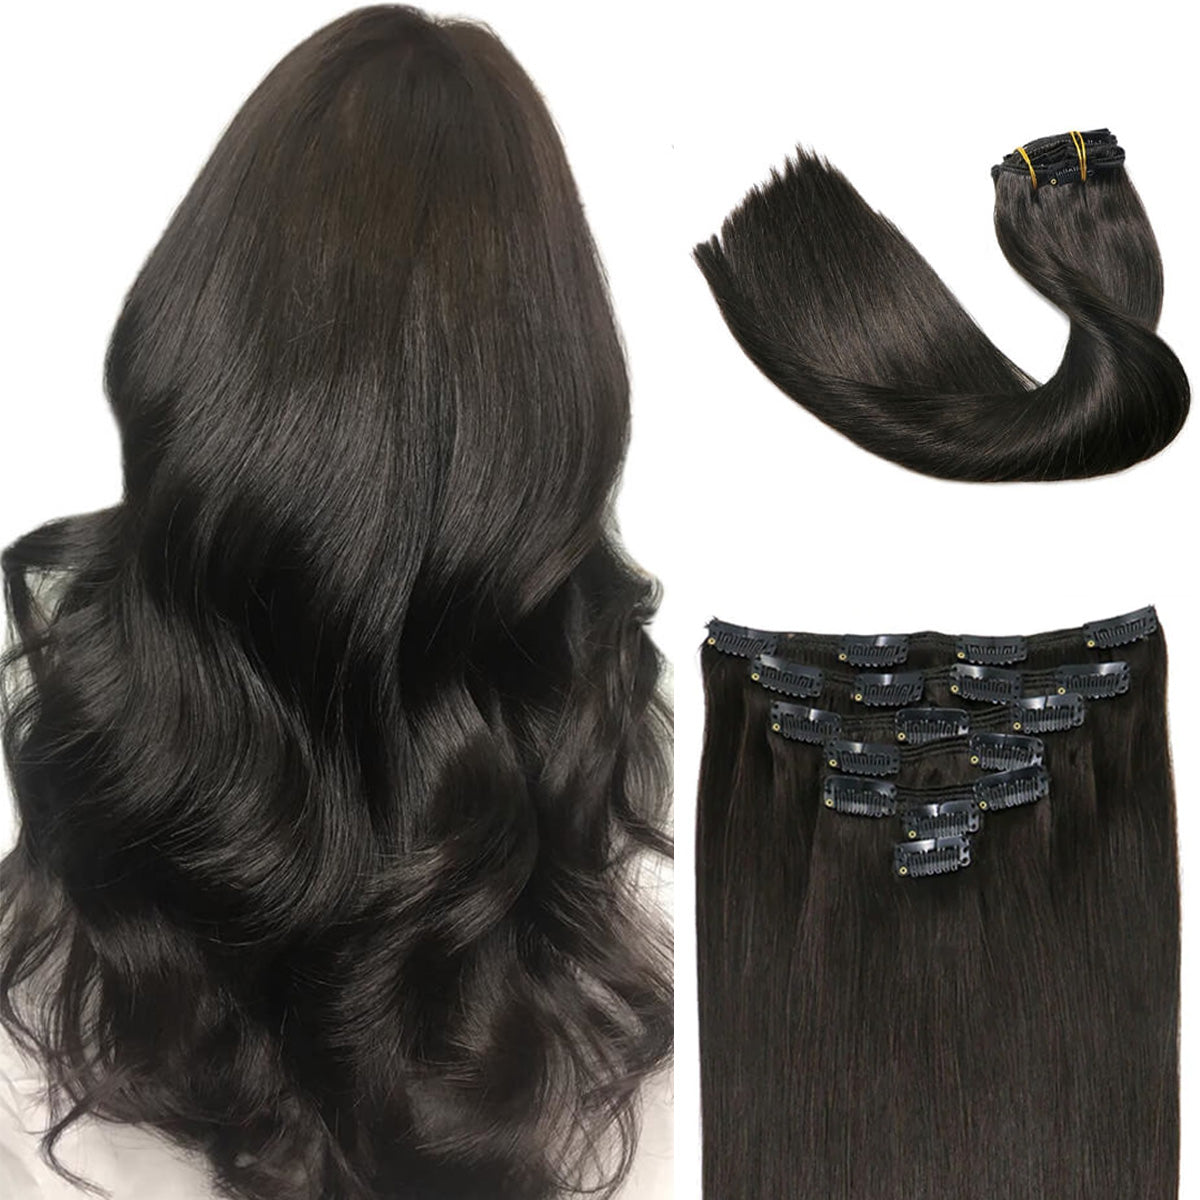 Natural Black Clip In Hair Extensions 120g set